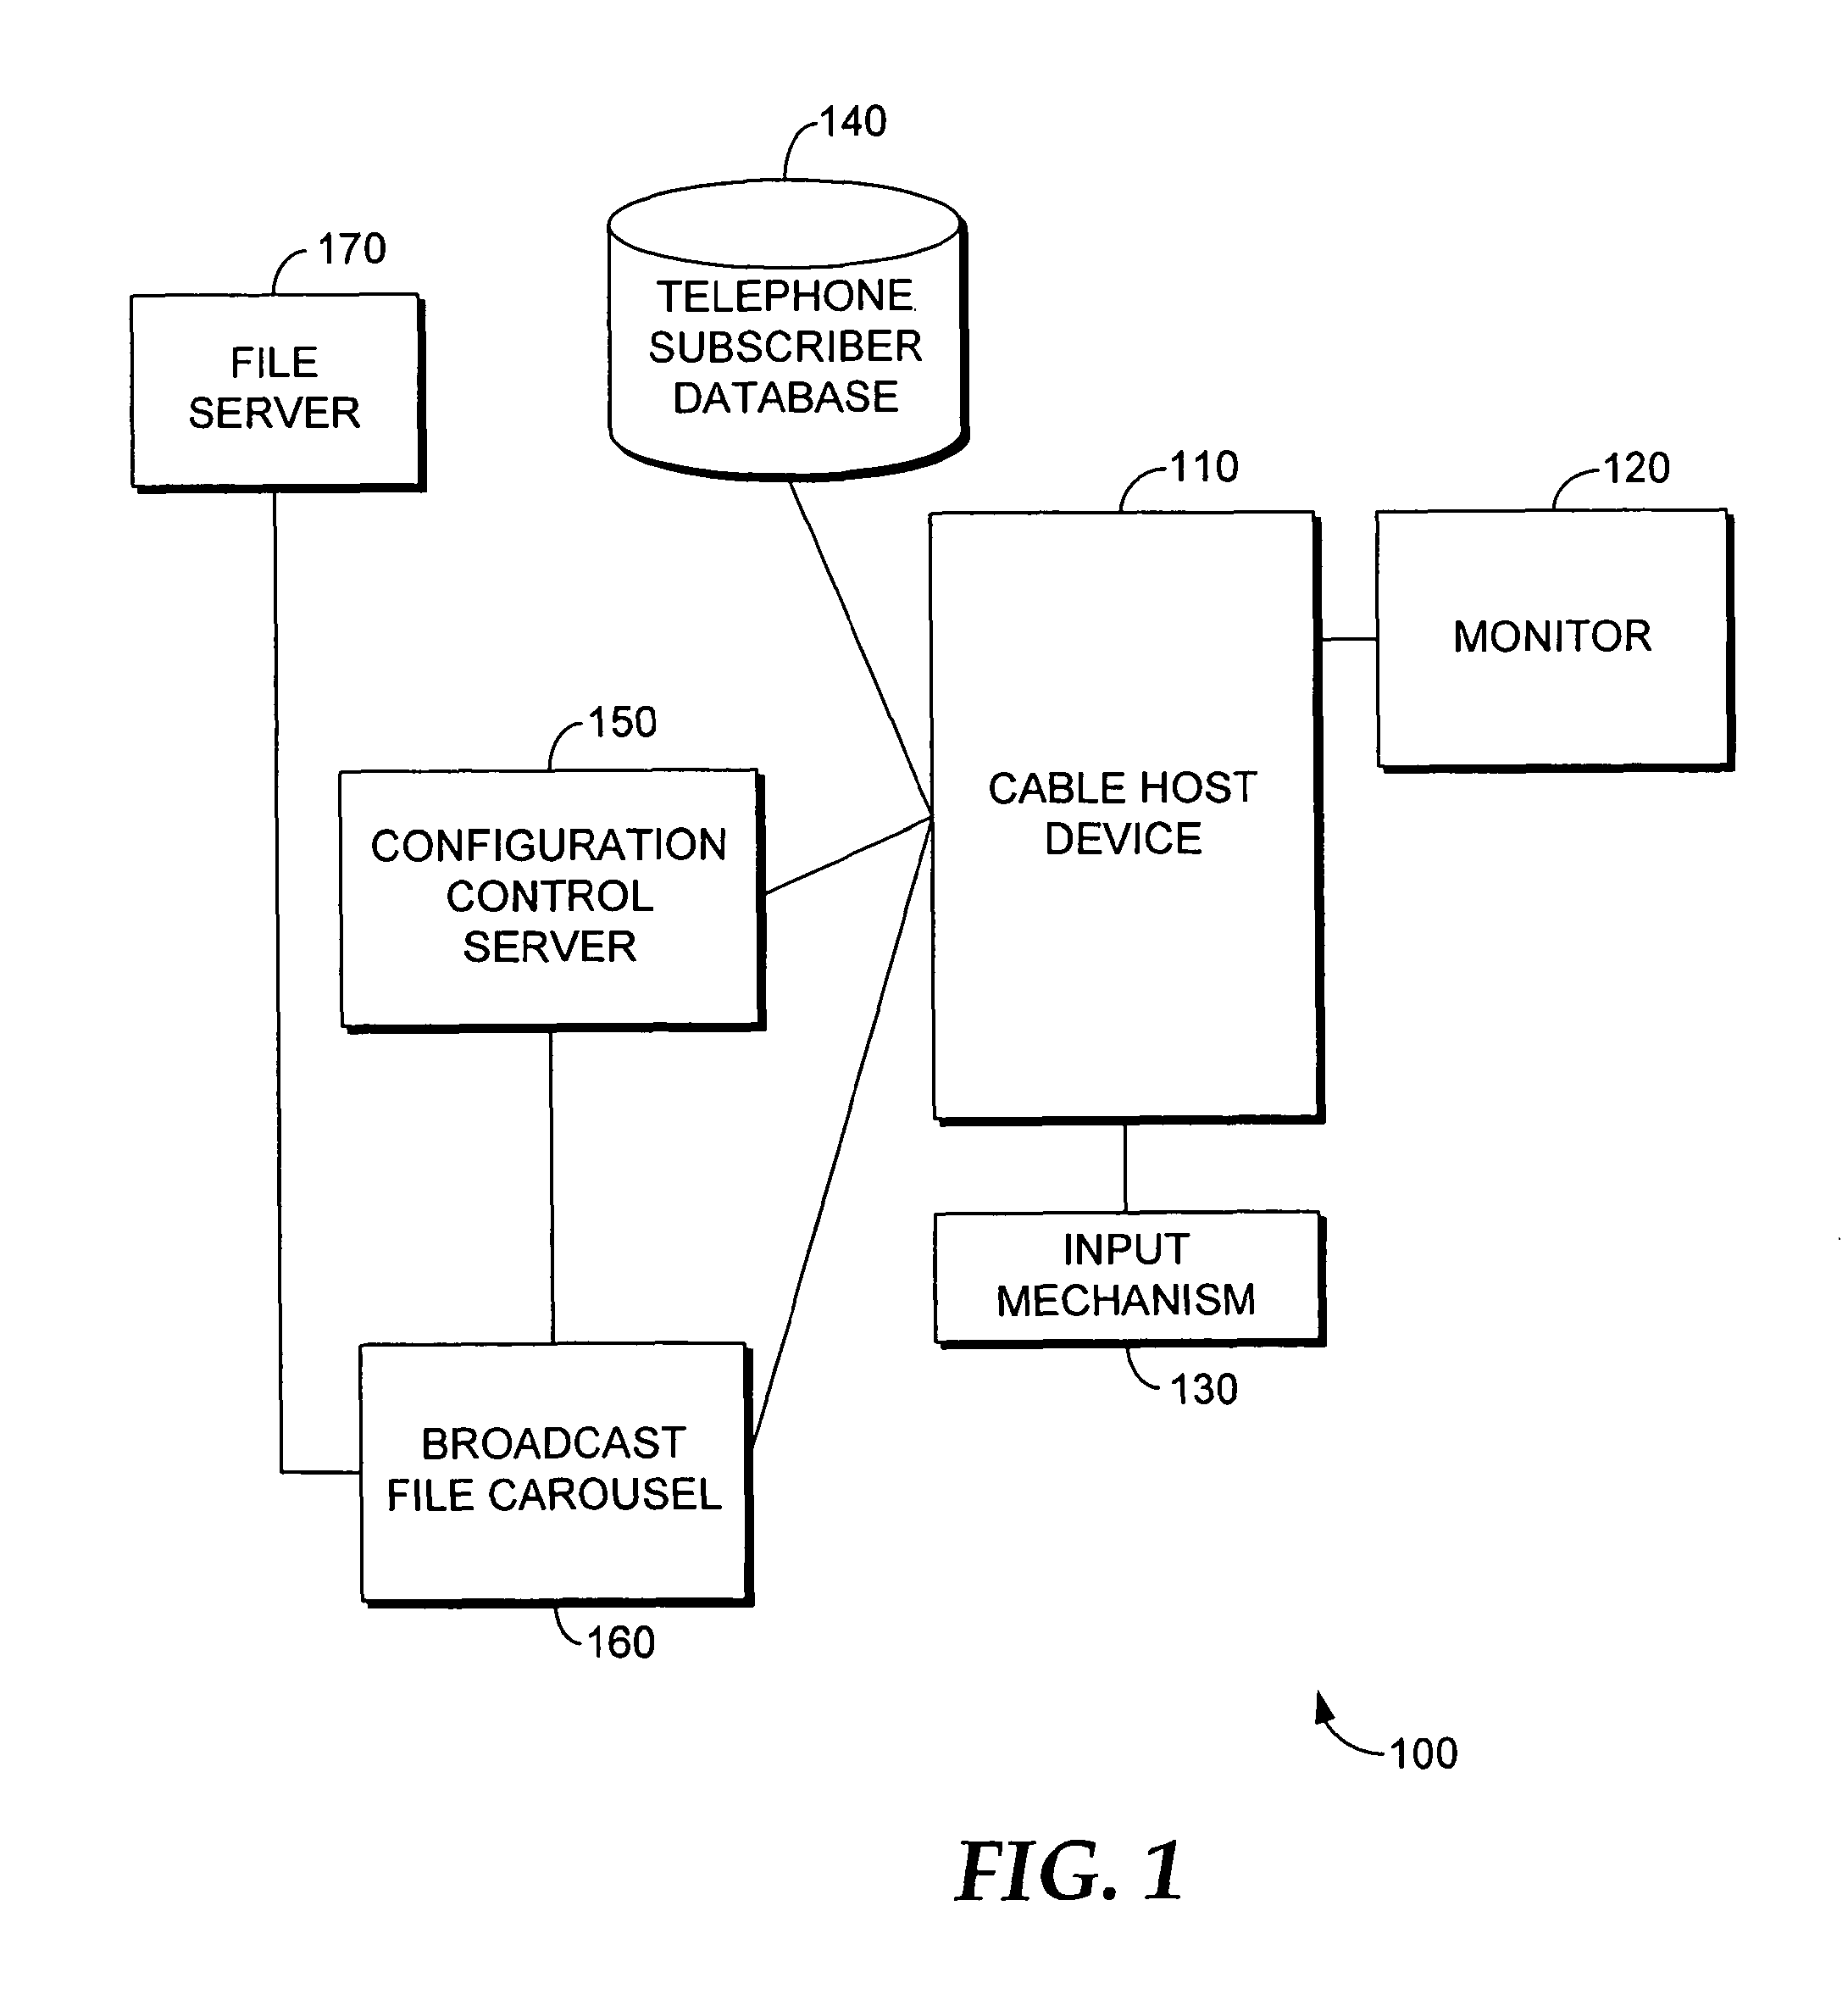 System and method to provide services from a communication network to a media-delivery network via a host device connected to the media-delivery network